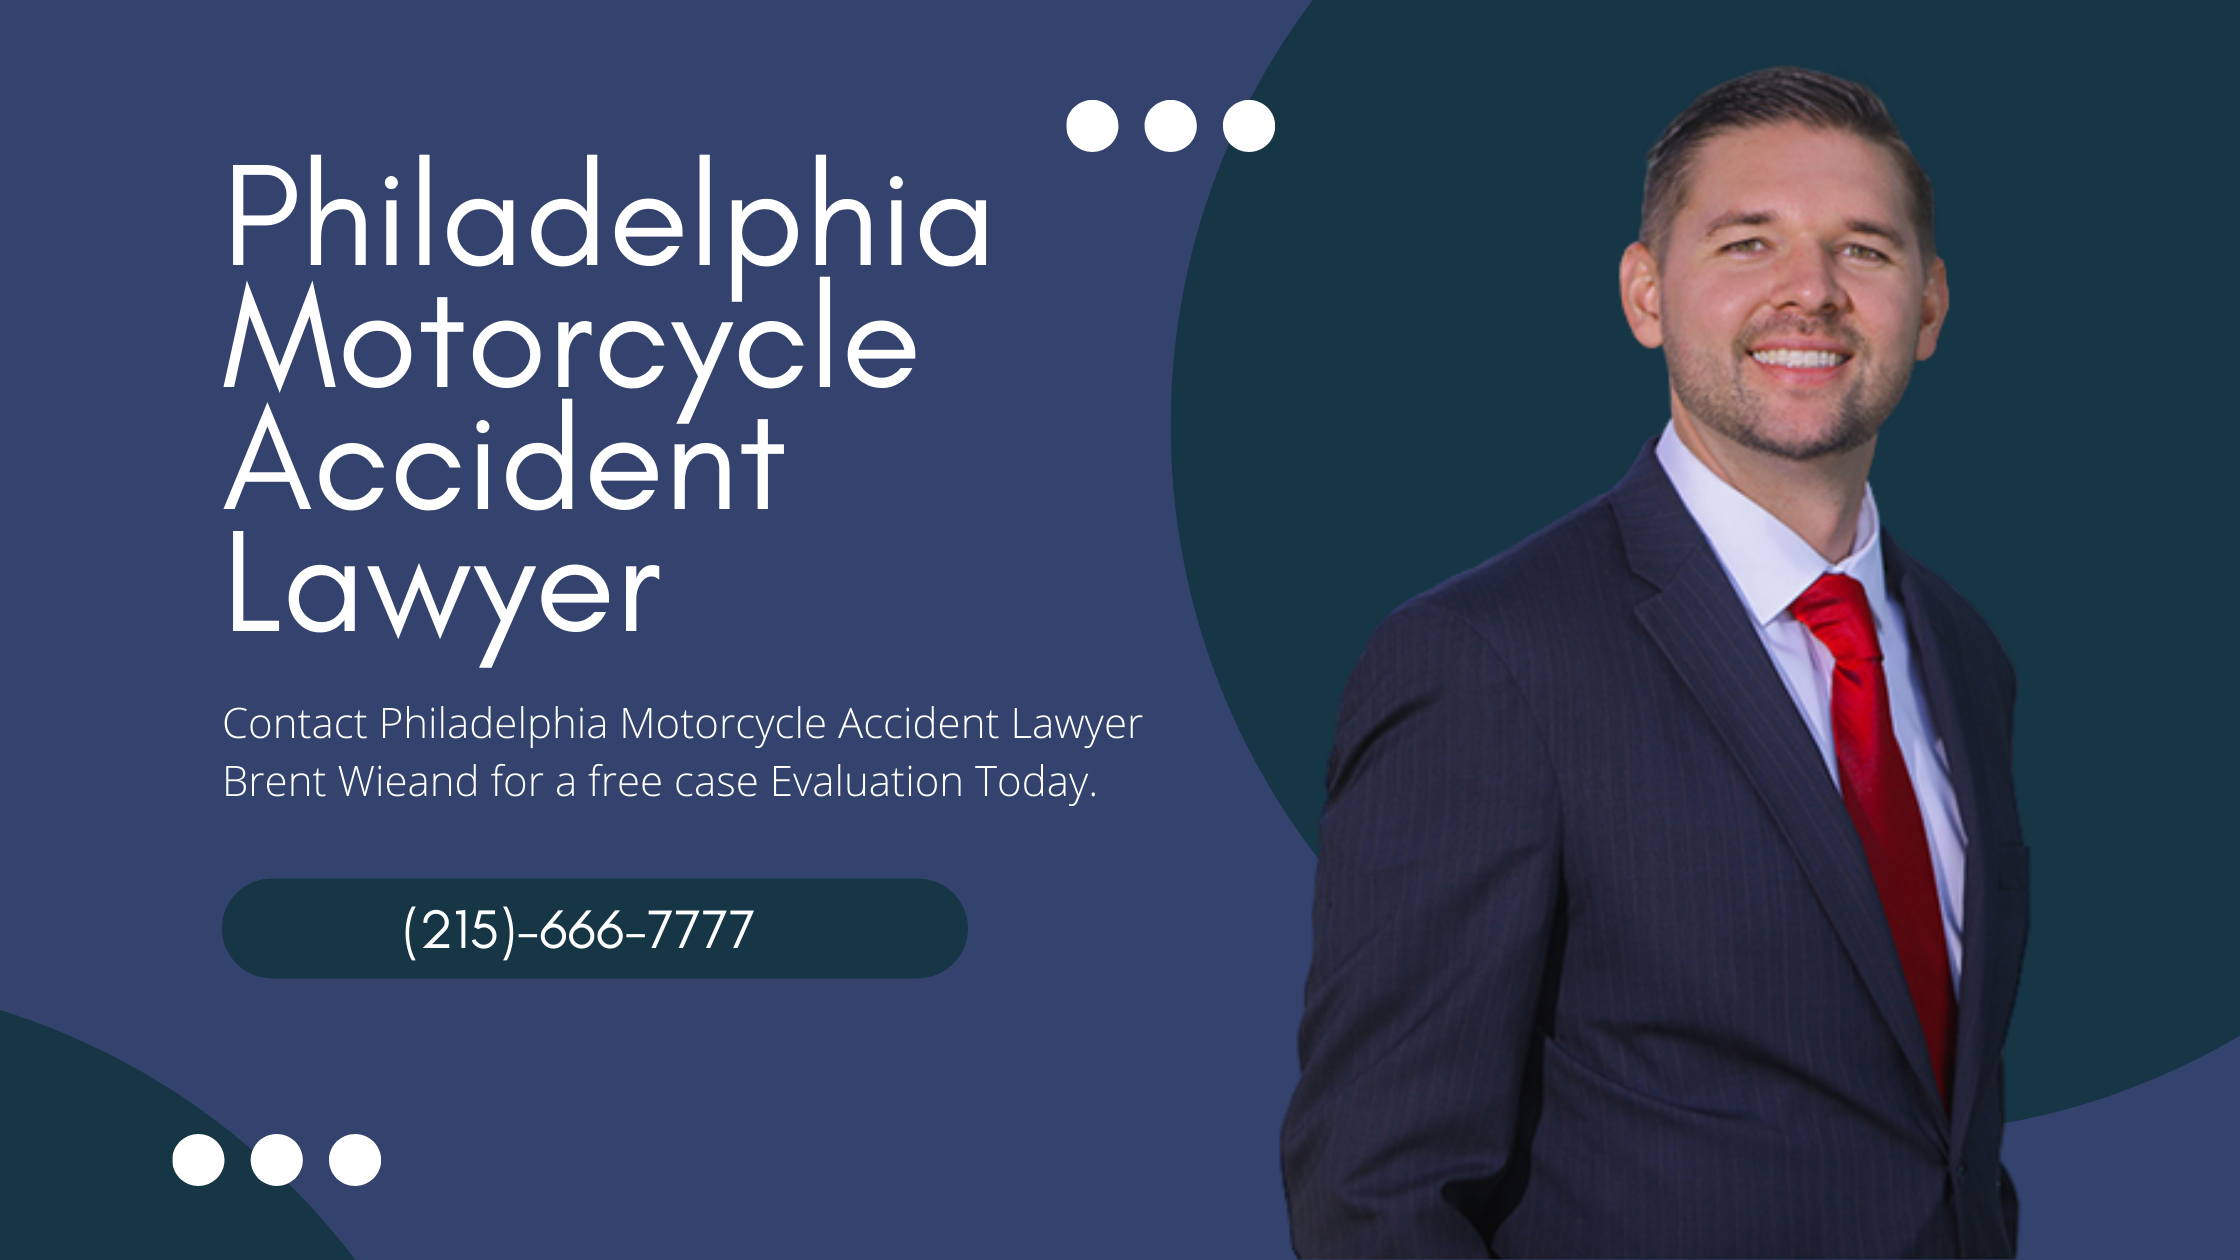 Contact Philadelphia Motorcycle Accident Lawyer Brent Wieand